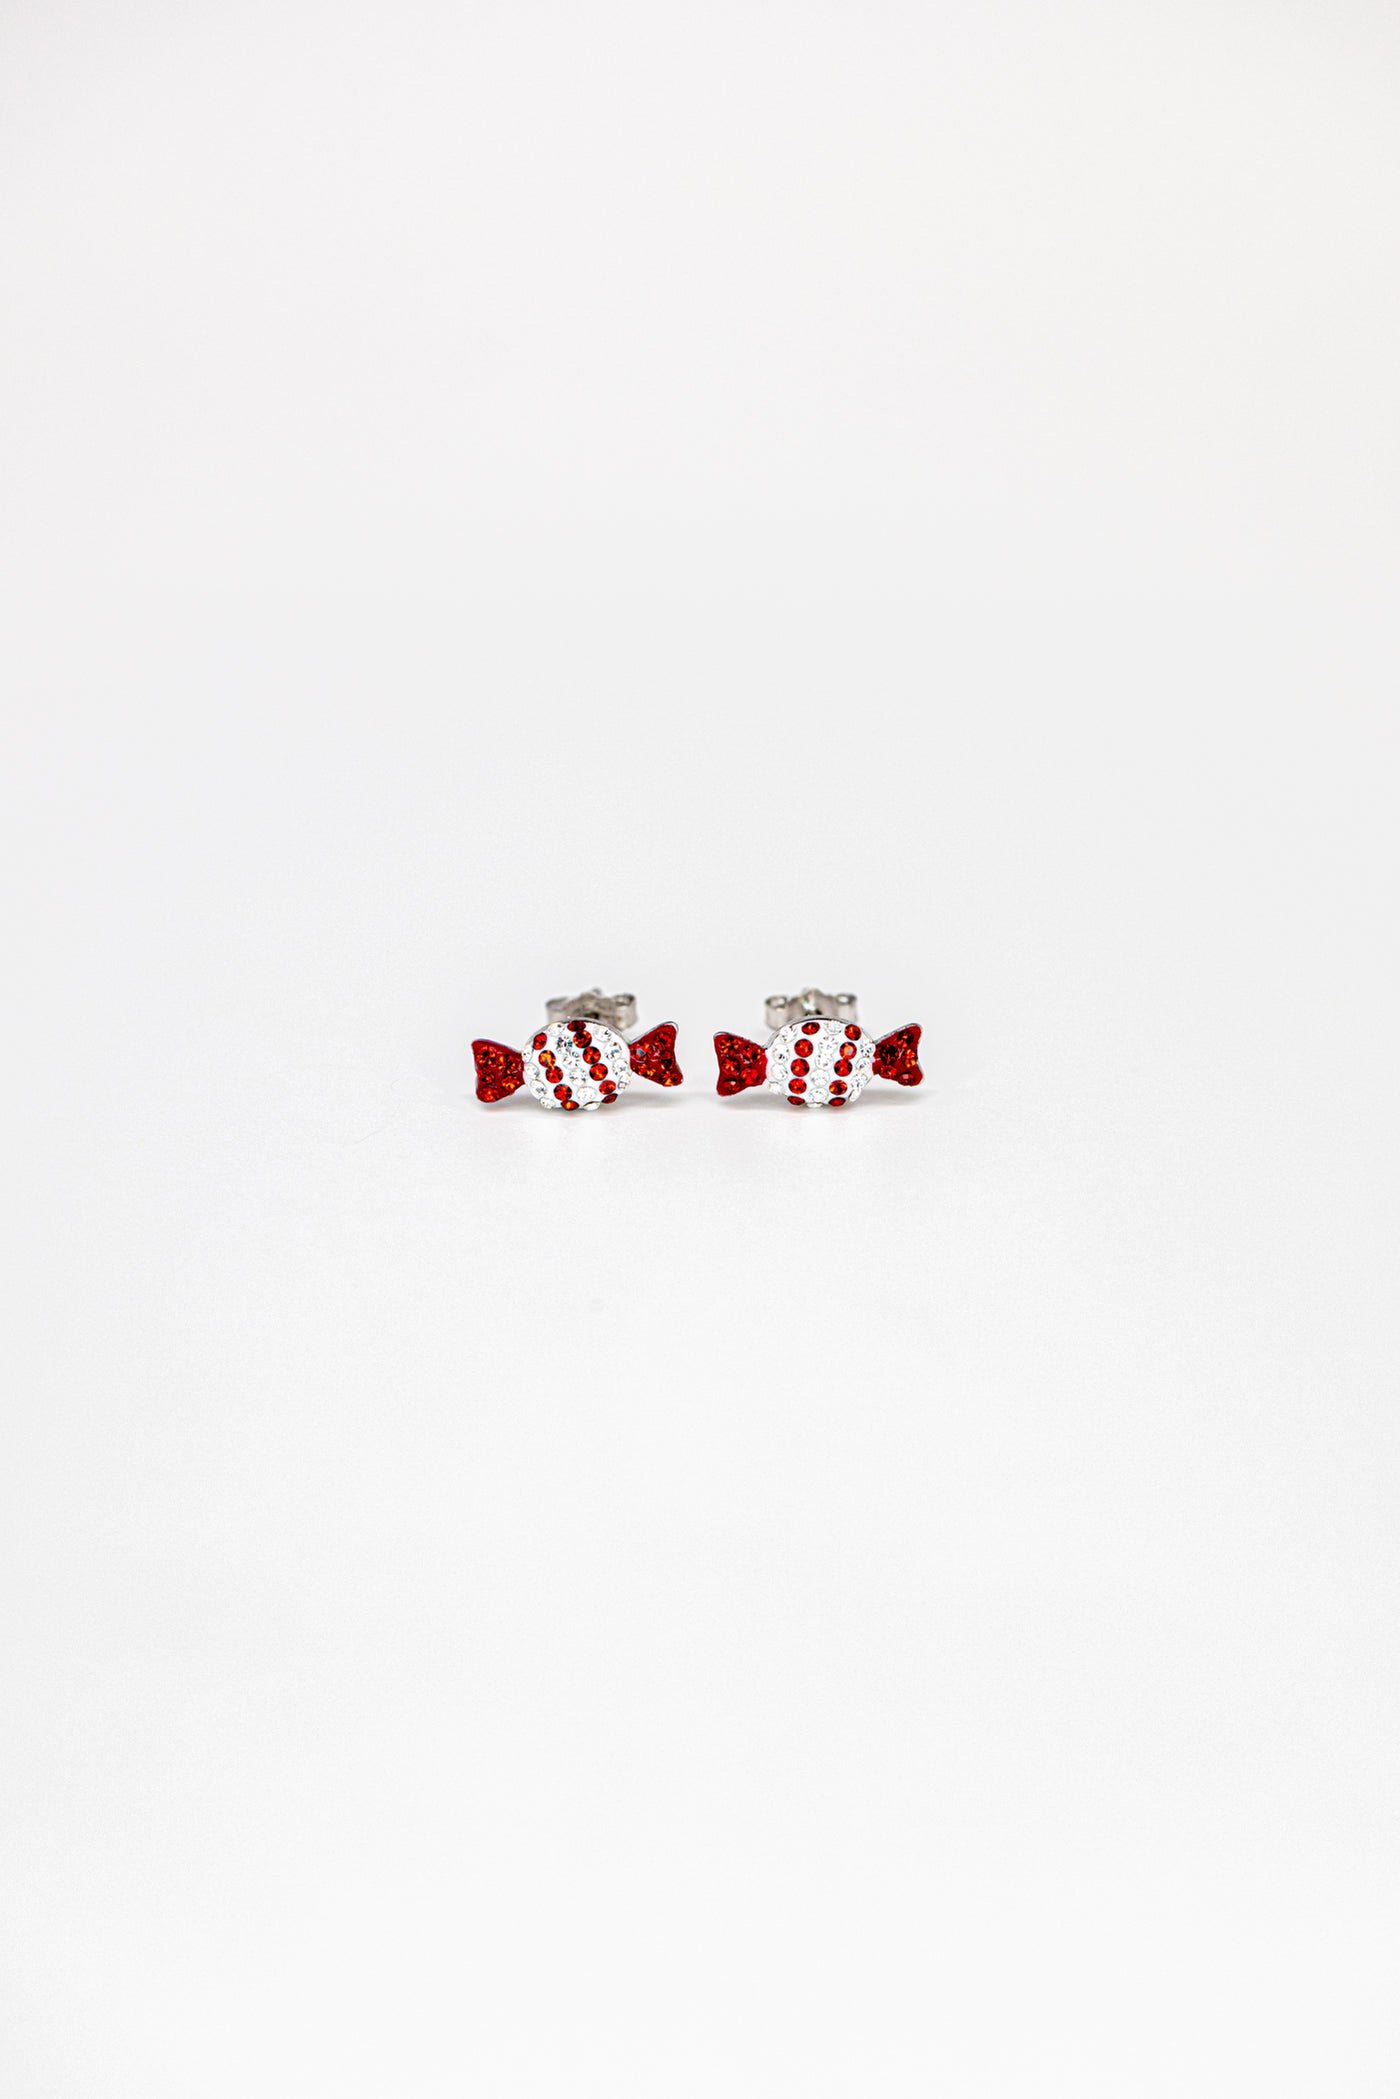 Red and White Holiday Candy Crystal Sterling Silver Earrings